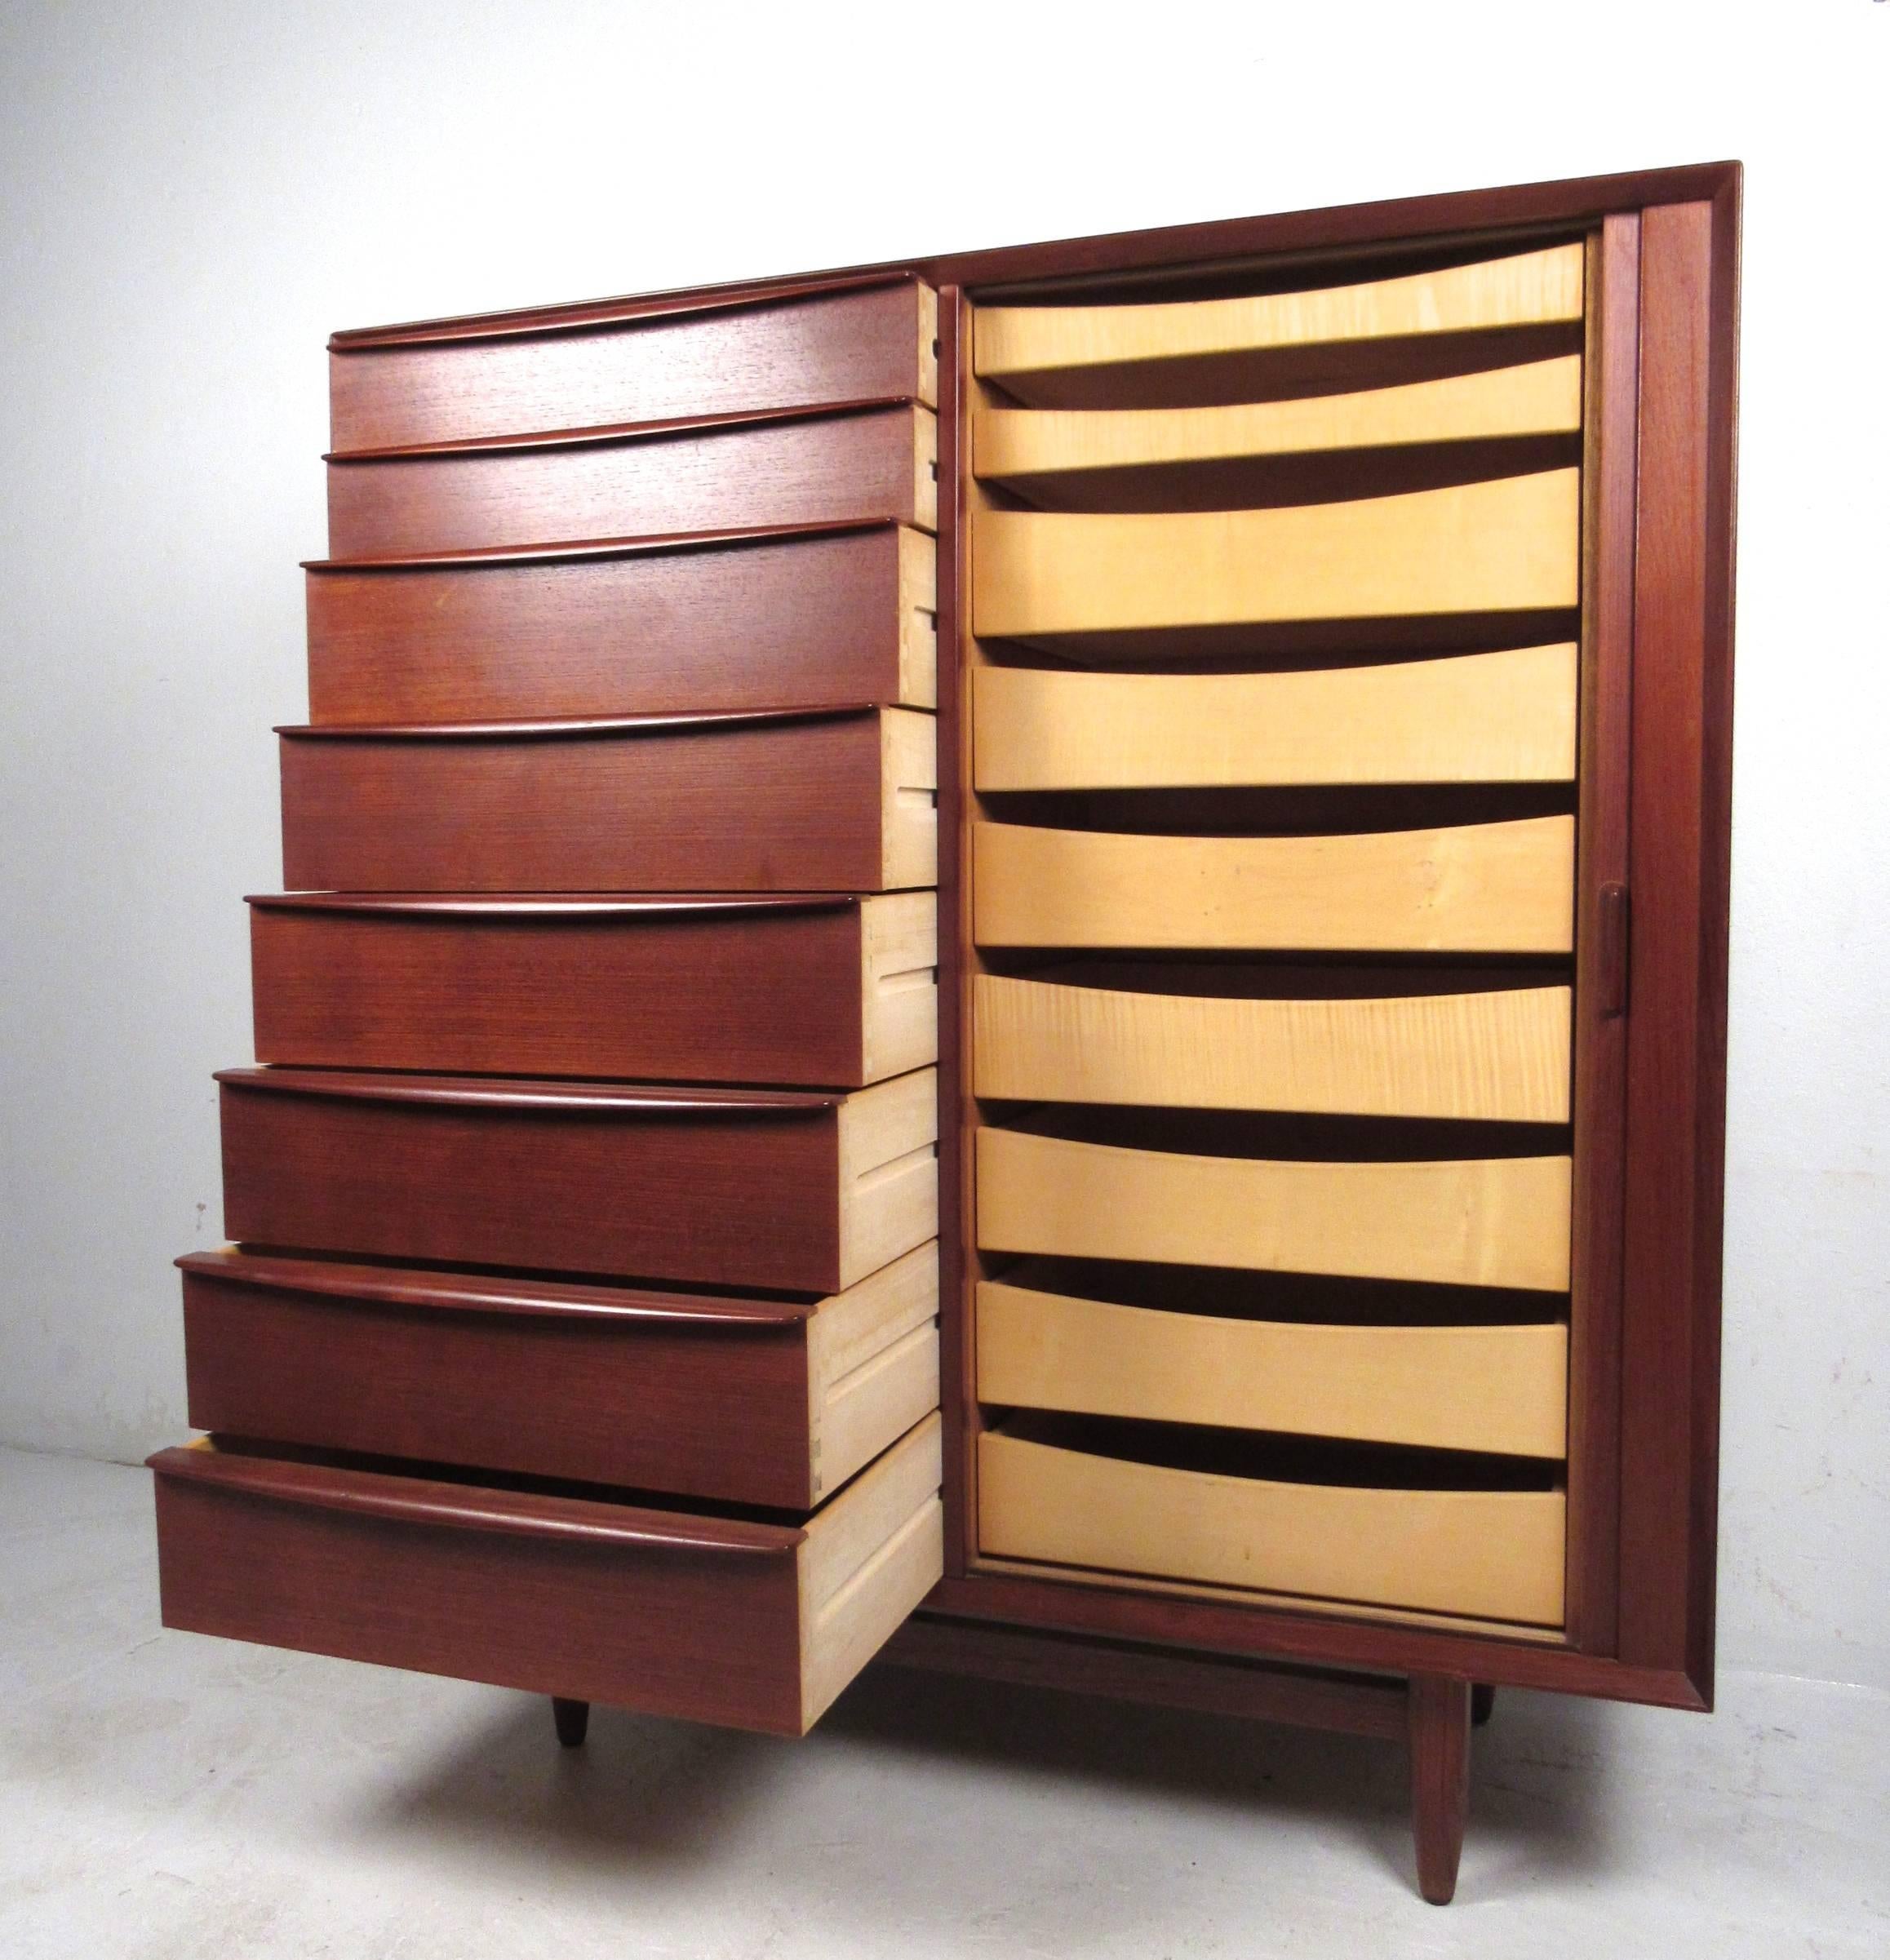 This gorgeous teak dresser by Falster boasts a beautiful teak finish, complete with dovetailed carved drawer pulls, tambour door, tapered legs, and plenty of storage. Unique piece perfect for any interior, please confirm item location (NY or NJ).